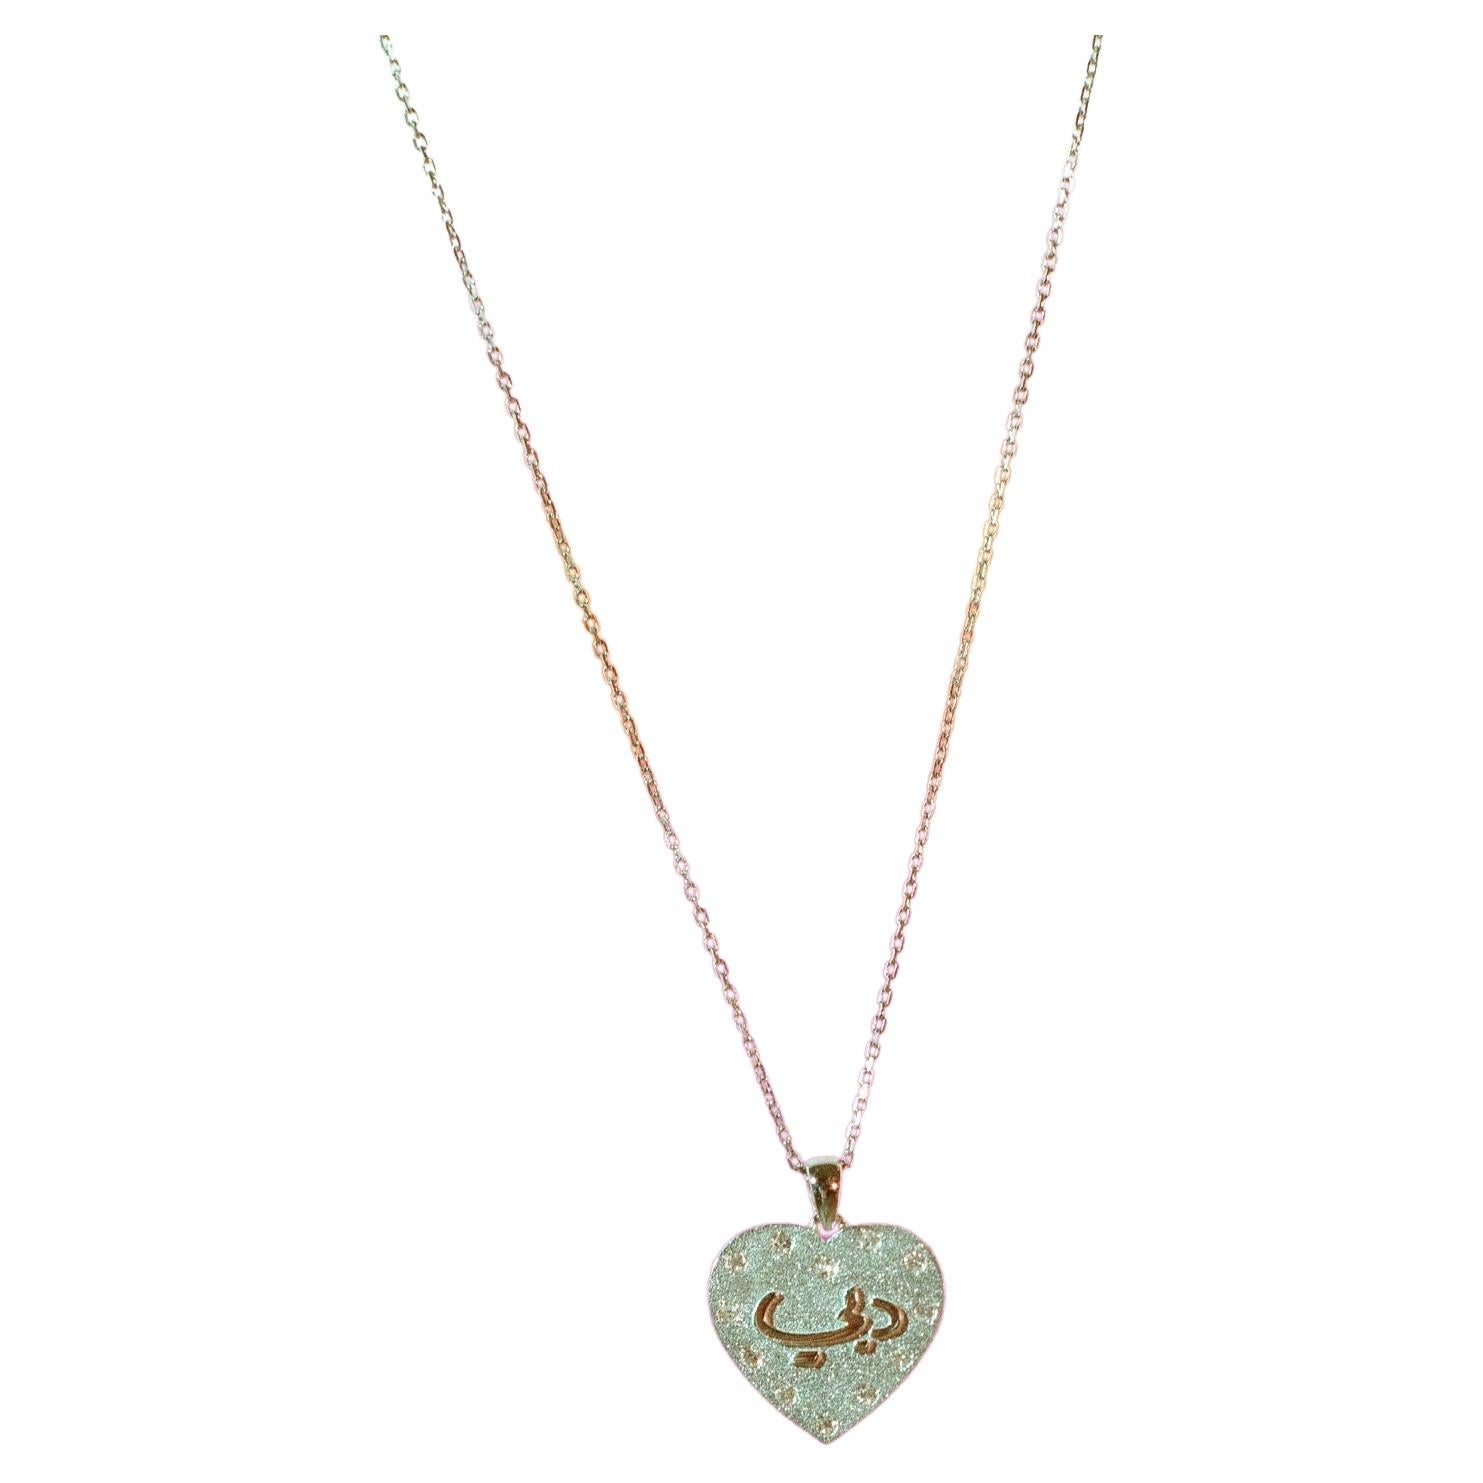 Heart shaped white 18k Gold  adjustable chain Necklace.   For Sale